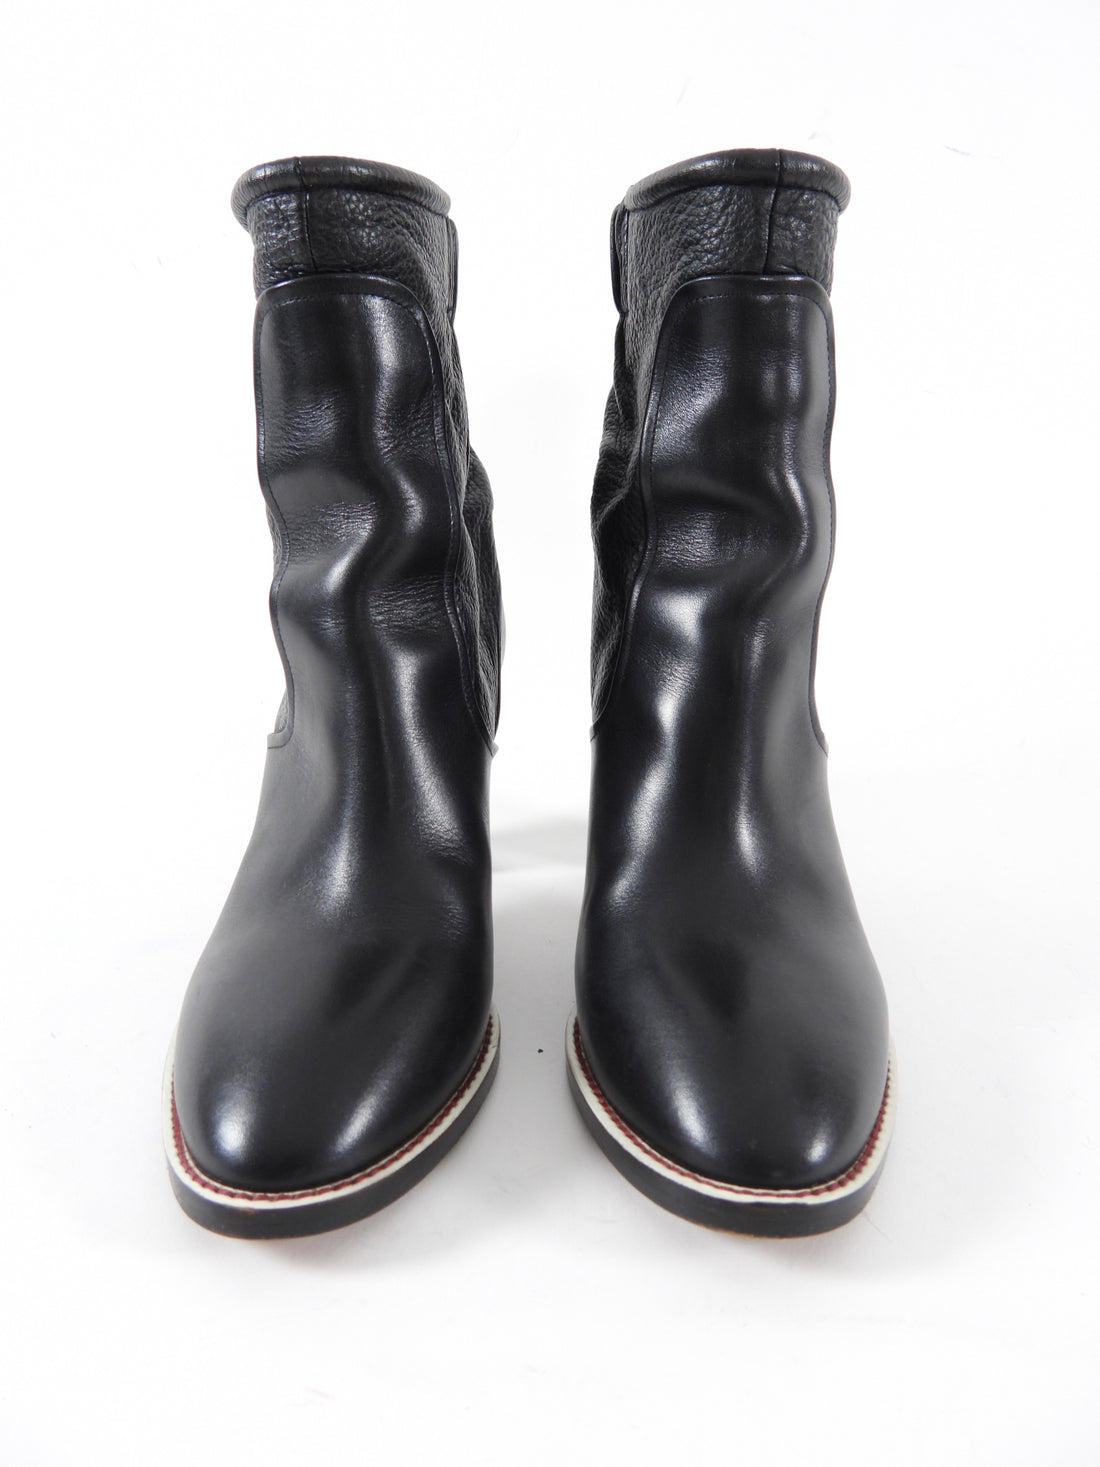 Chloe Black Leather Ankle Boots - 37.5